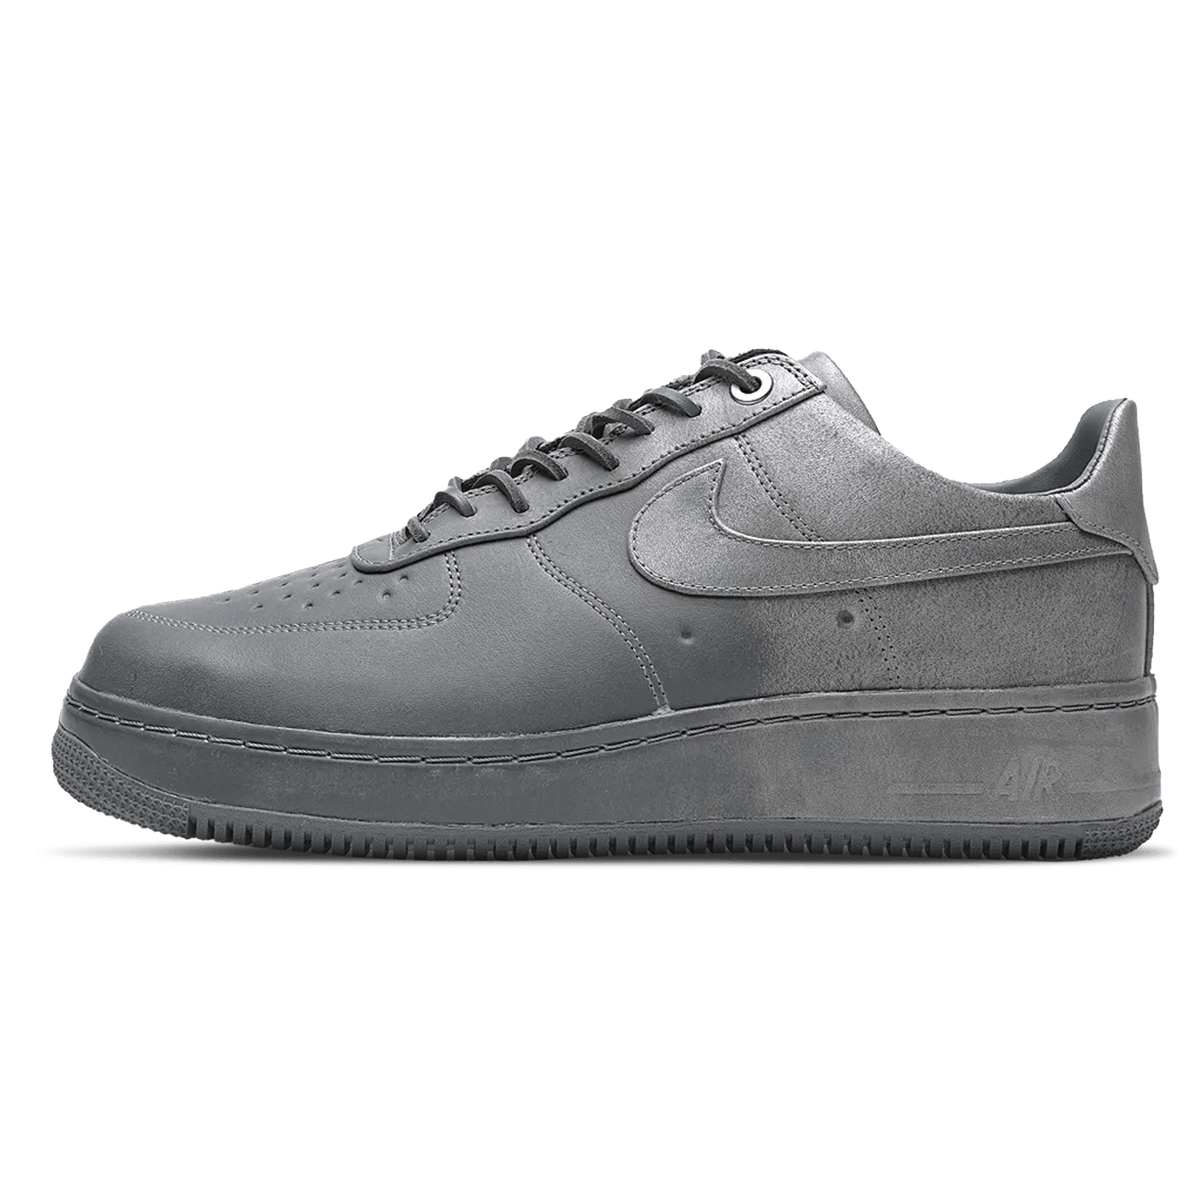 Nike Uses Air Force 1 Low Cmft 'Pigalle' - UrlfreezeShops